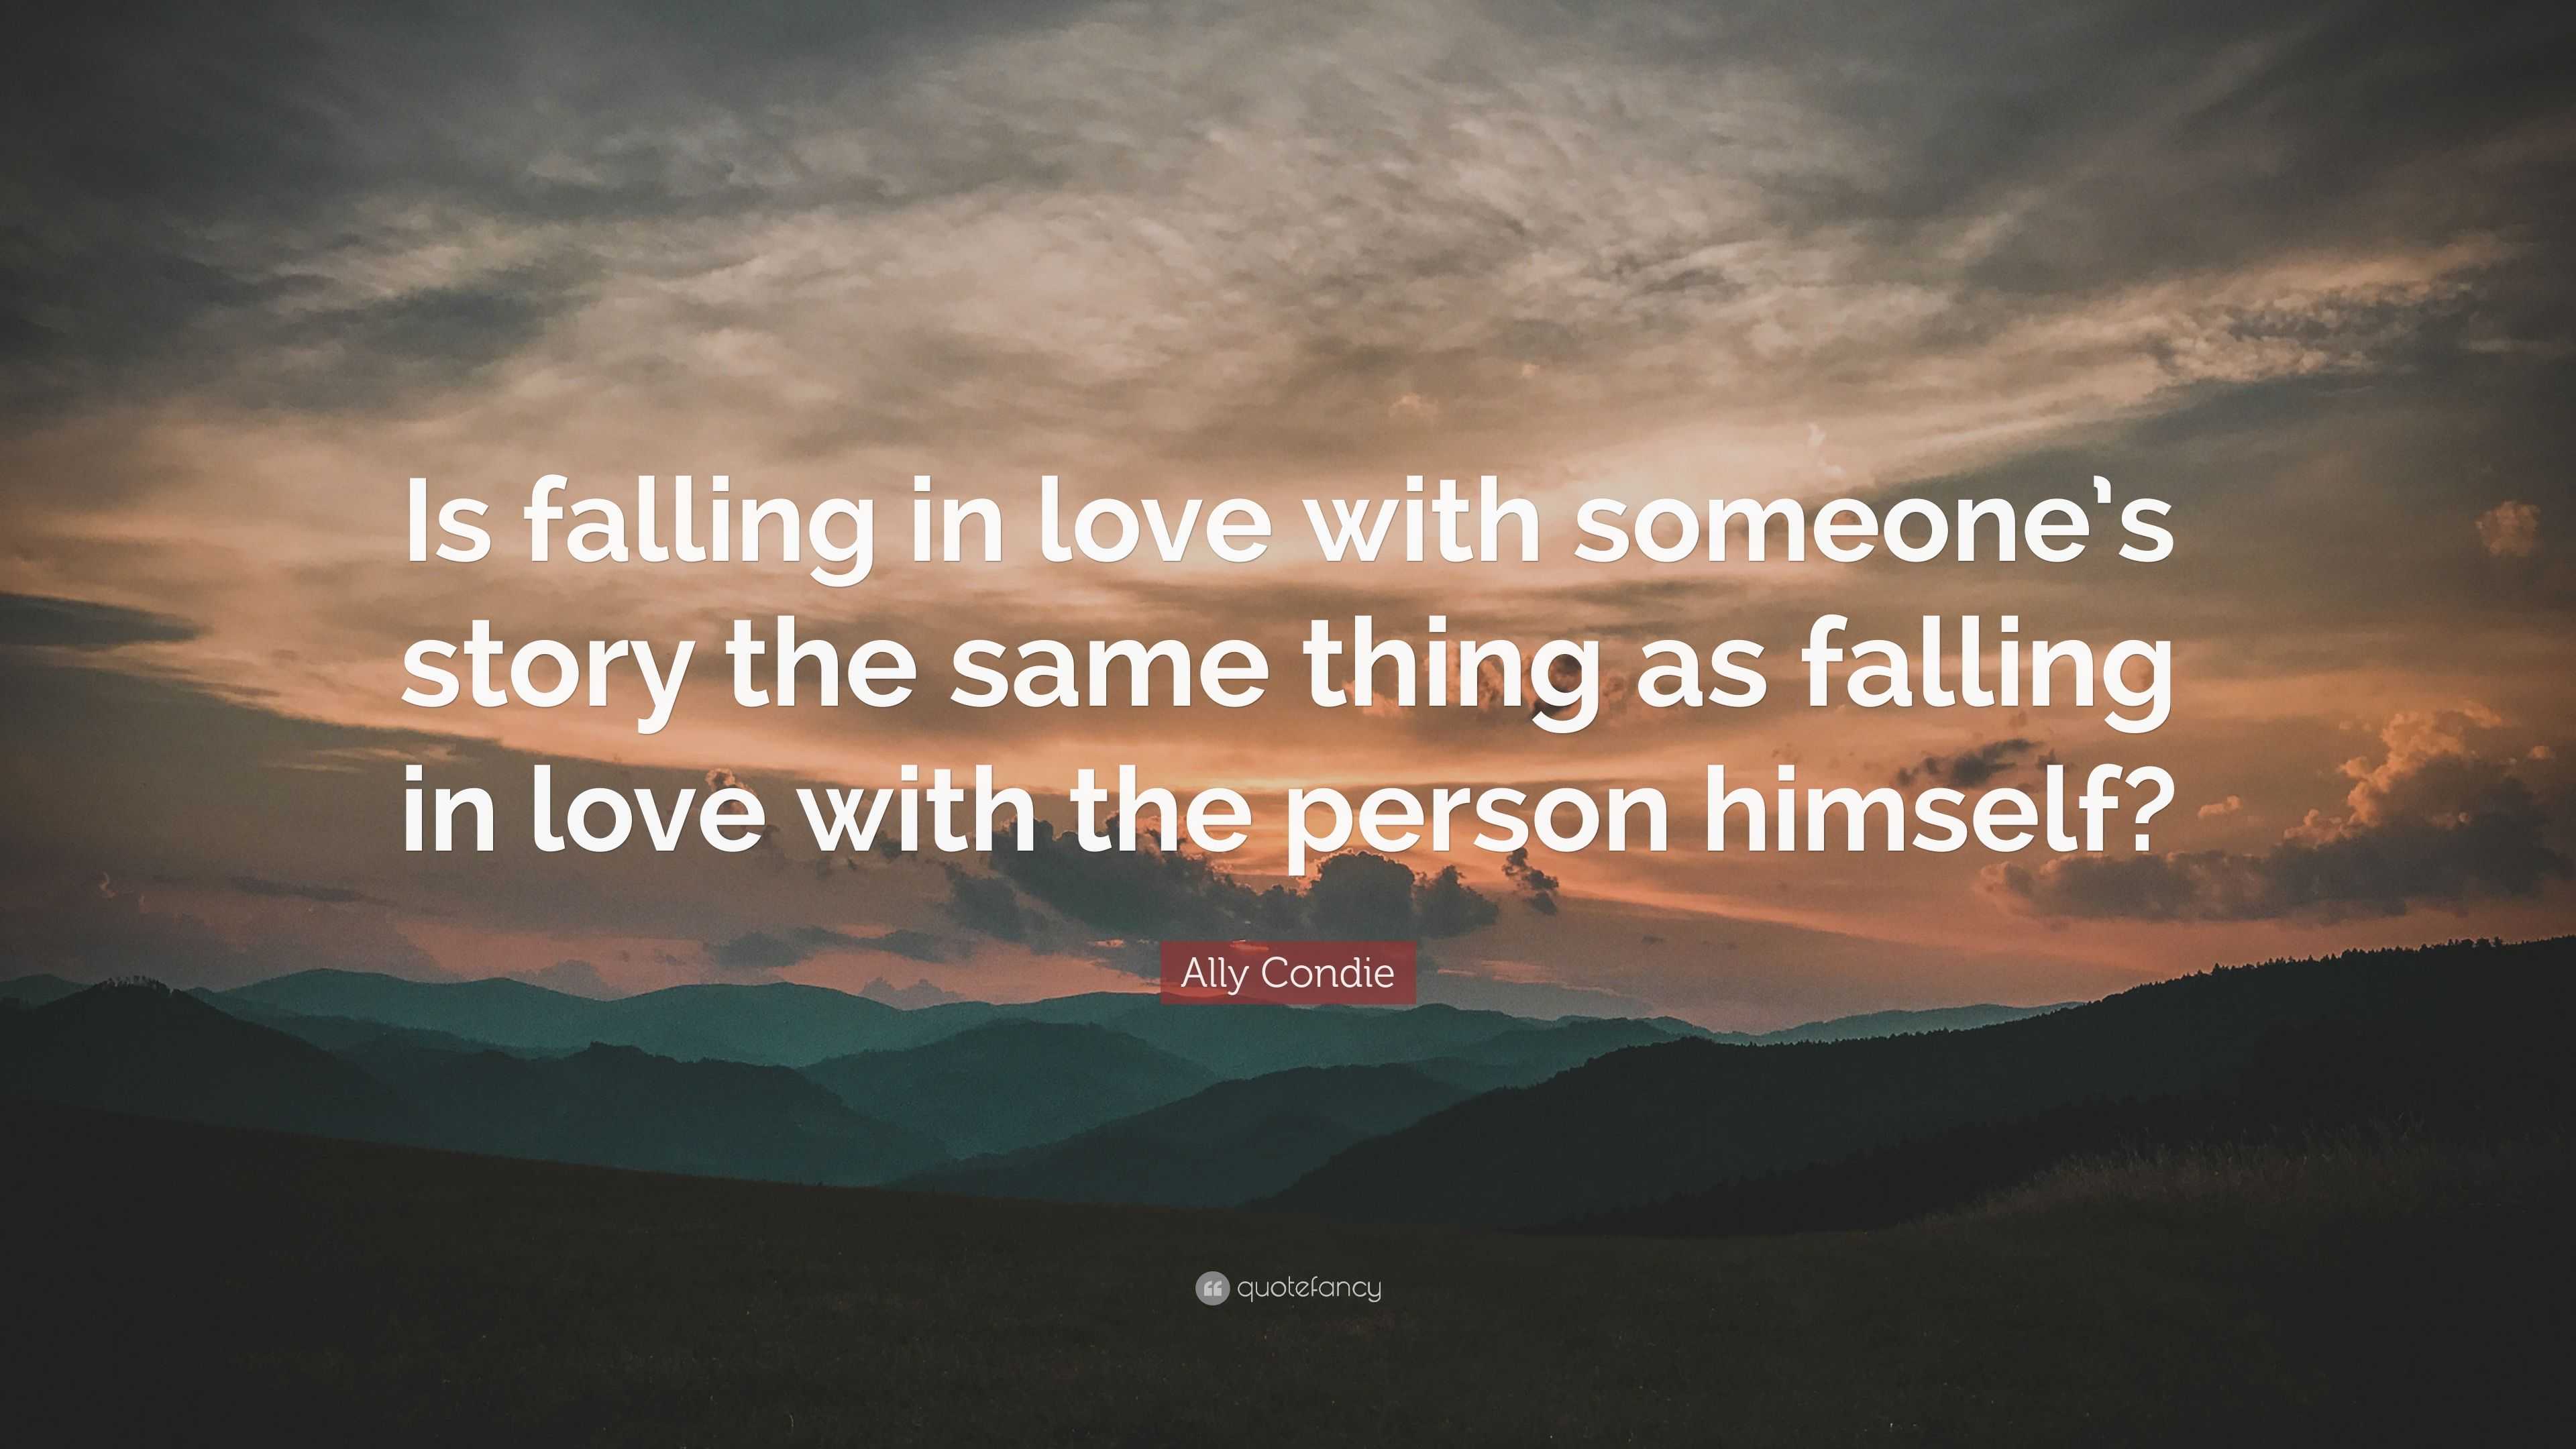 Ally Condie Quote: “Is falling in love with someone's story the same thing  as falling in